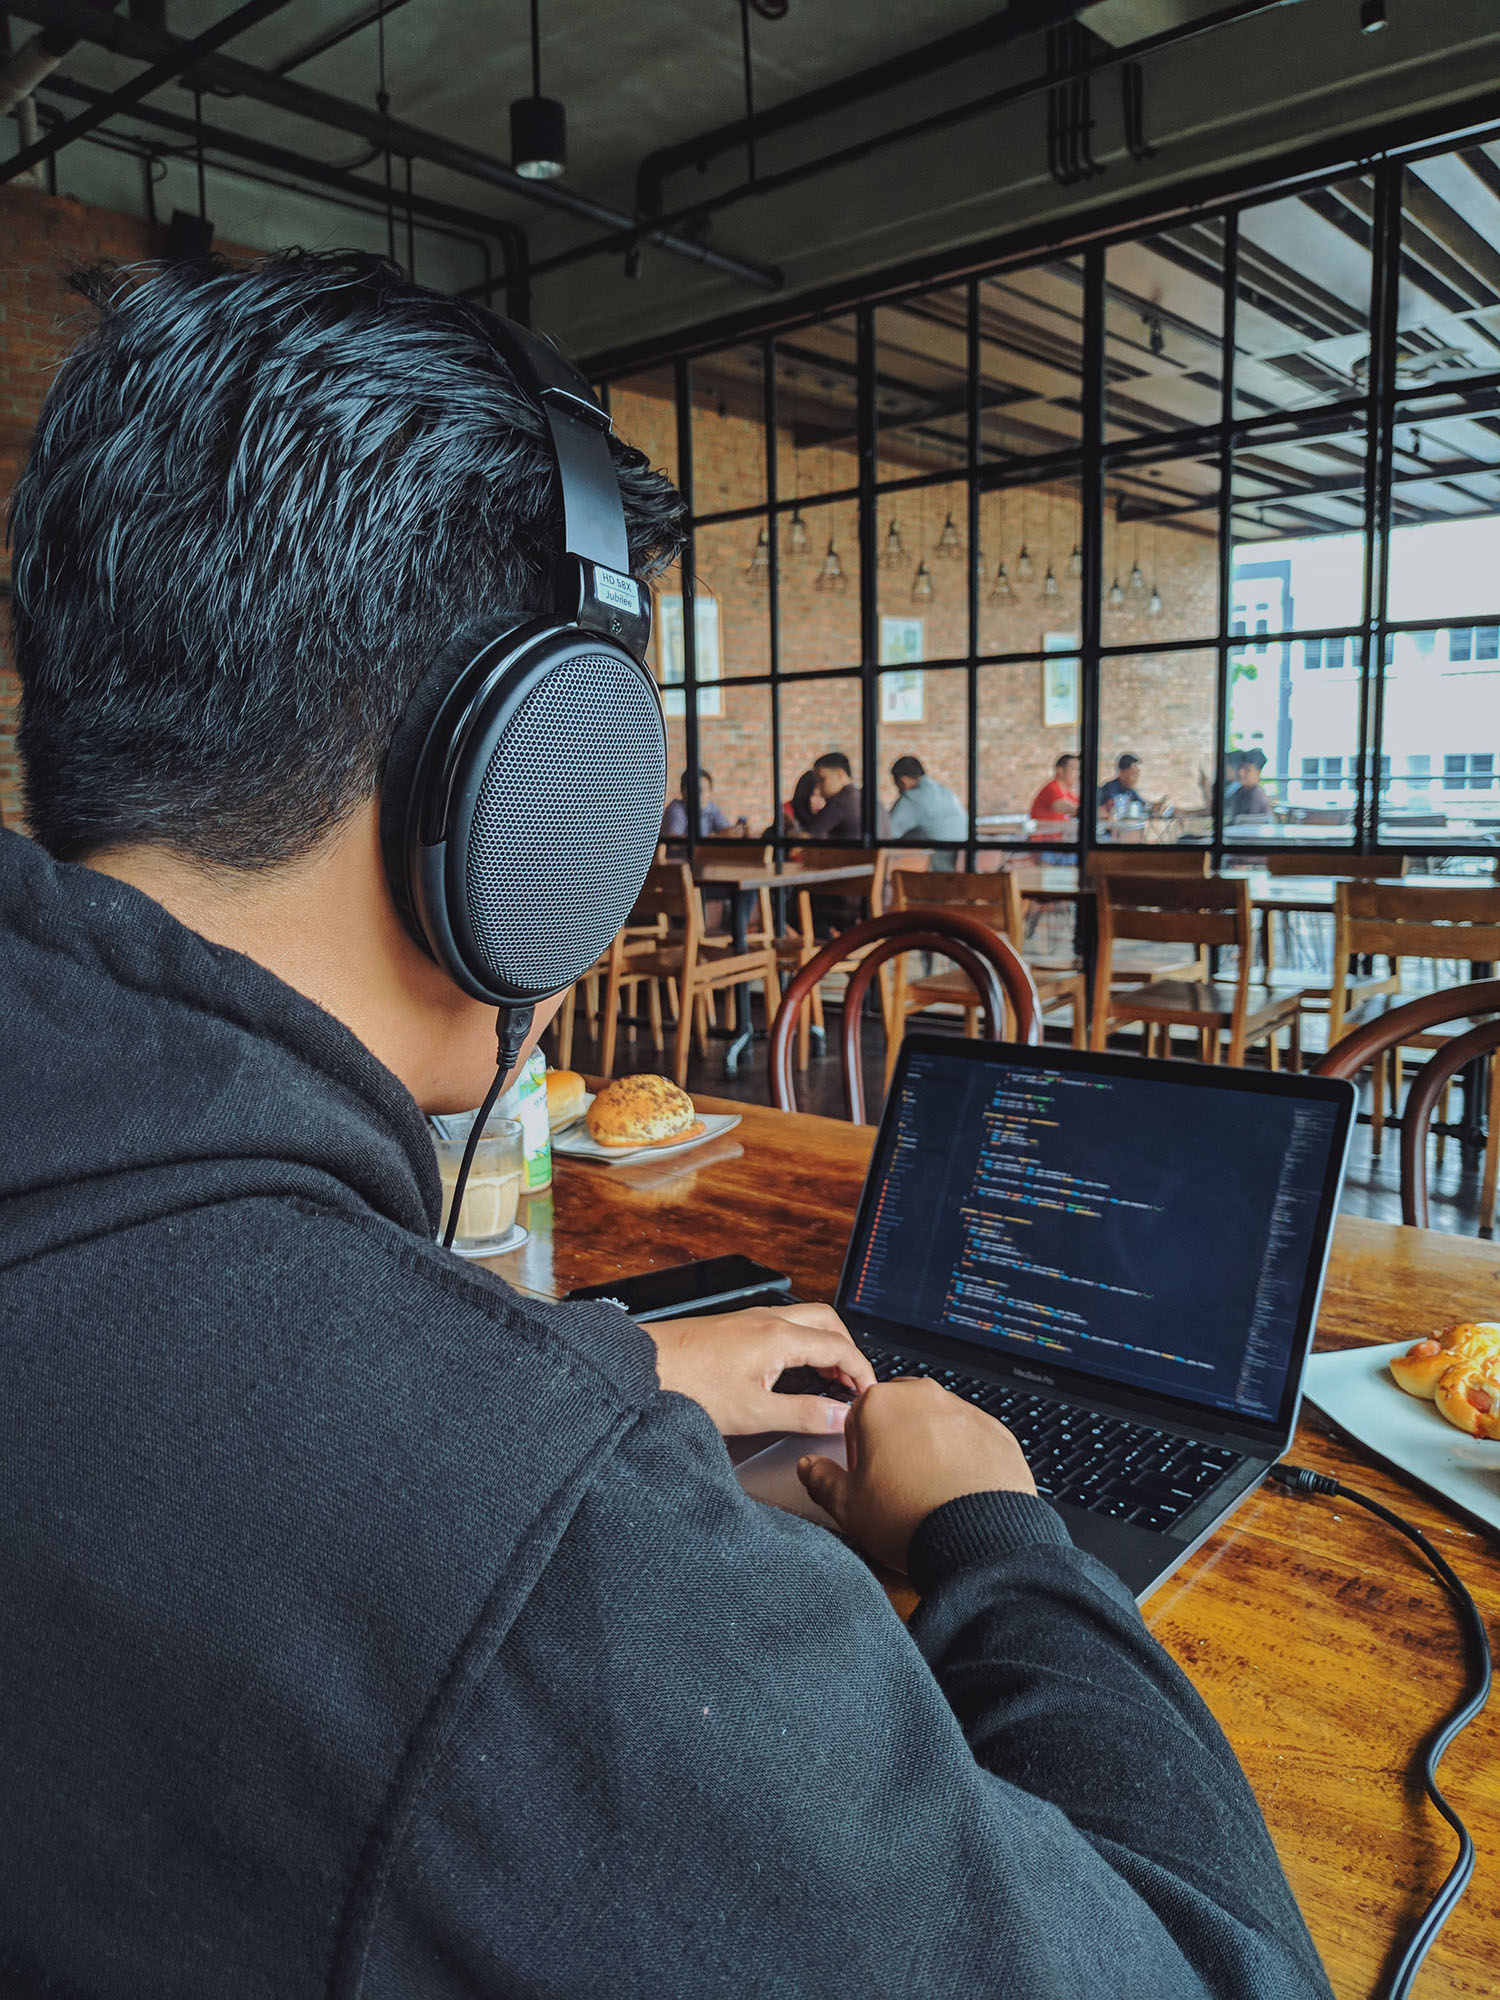 Coder wearing headphones in a co-working environment